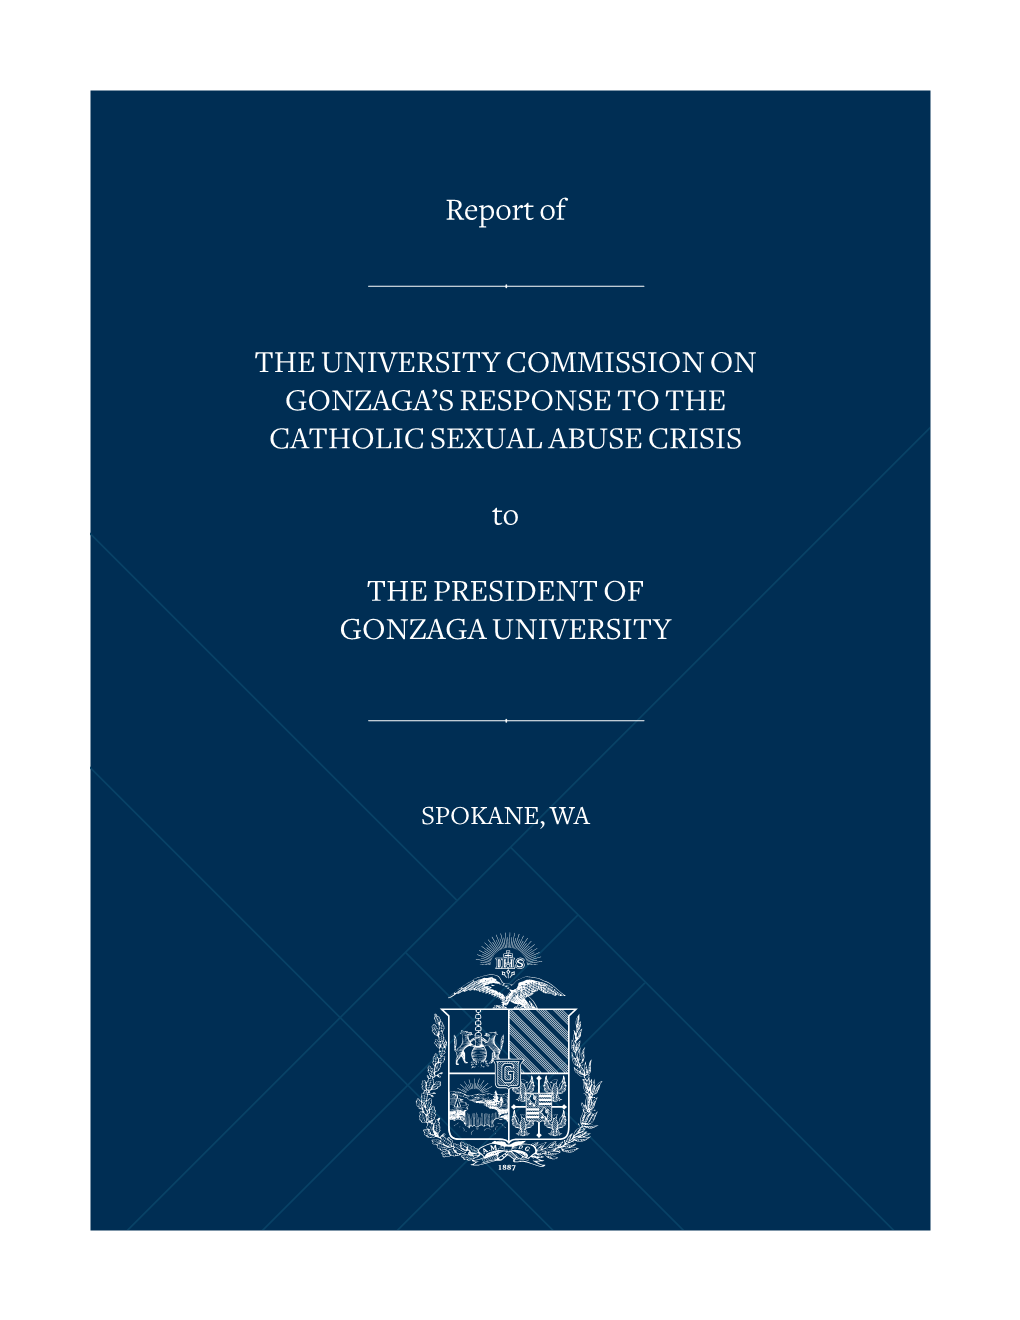 Report of the UNIVERSITY COMMISSION on GONZAGA's RESPONSE to the CATHOLIC SEXUAL ABUSE CRISIS to the PRESIDENT of GONZAGA UNIV